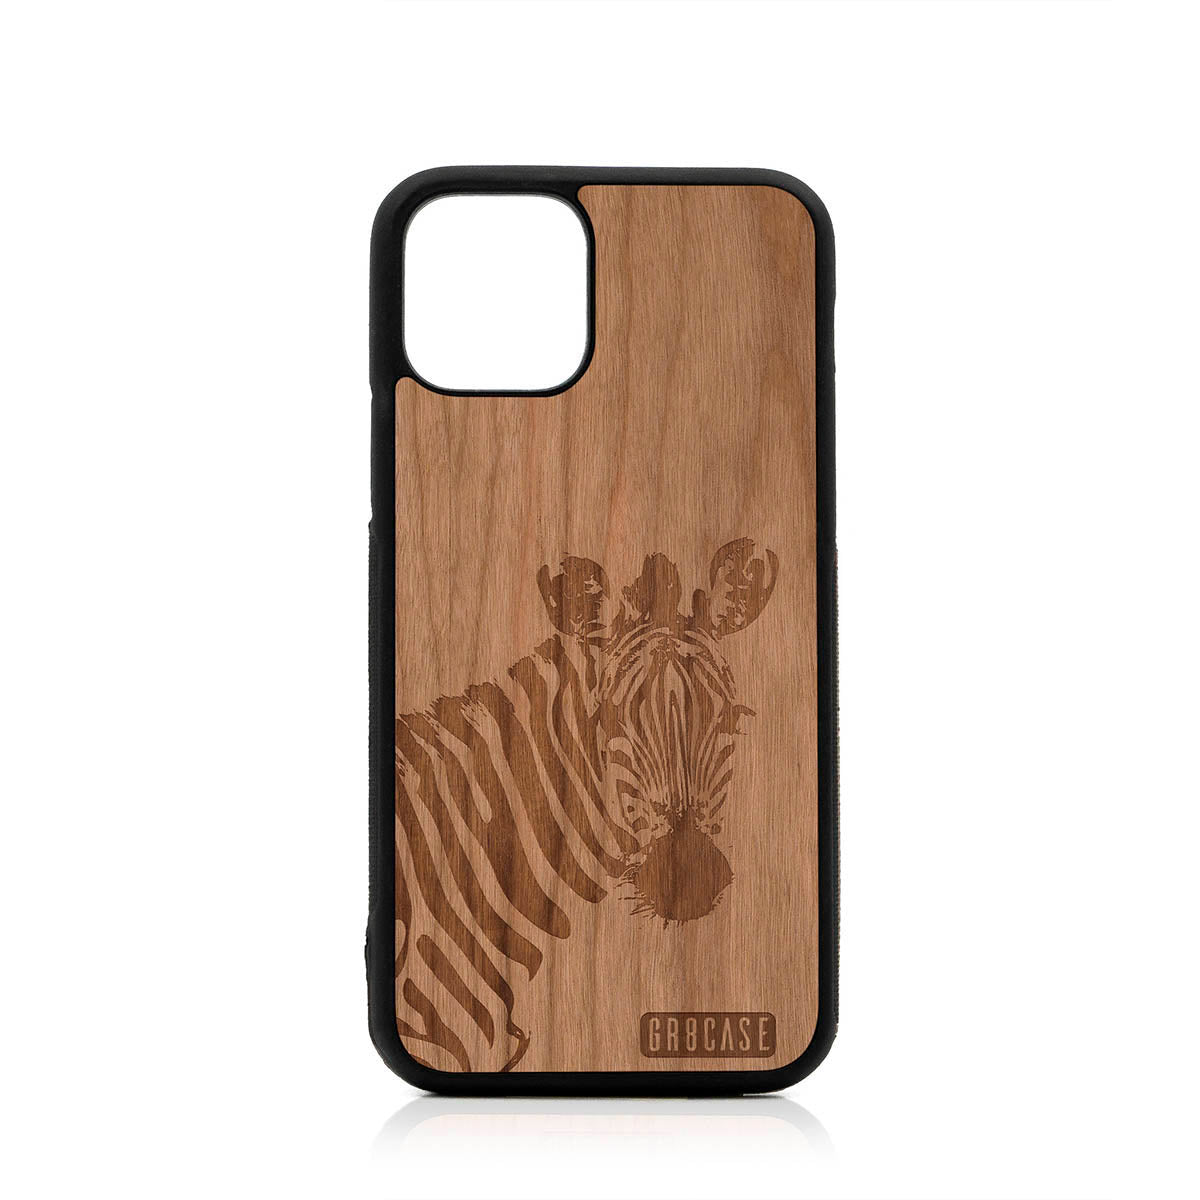 Lookout Zebra Design Wood Case For iPhone 11 Pro